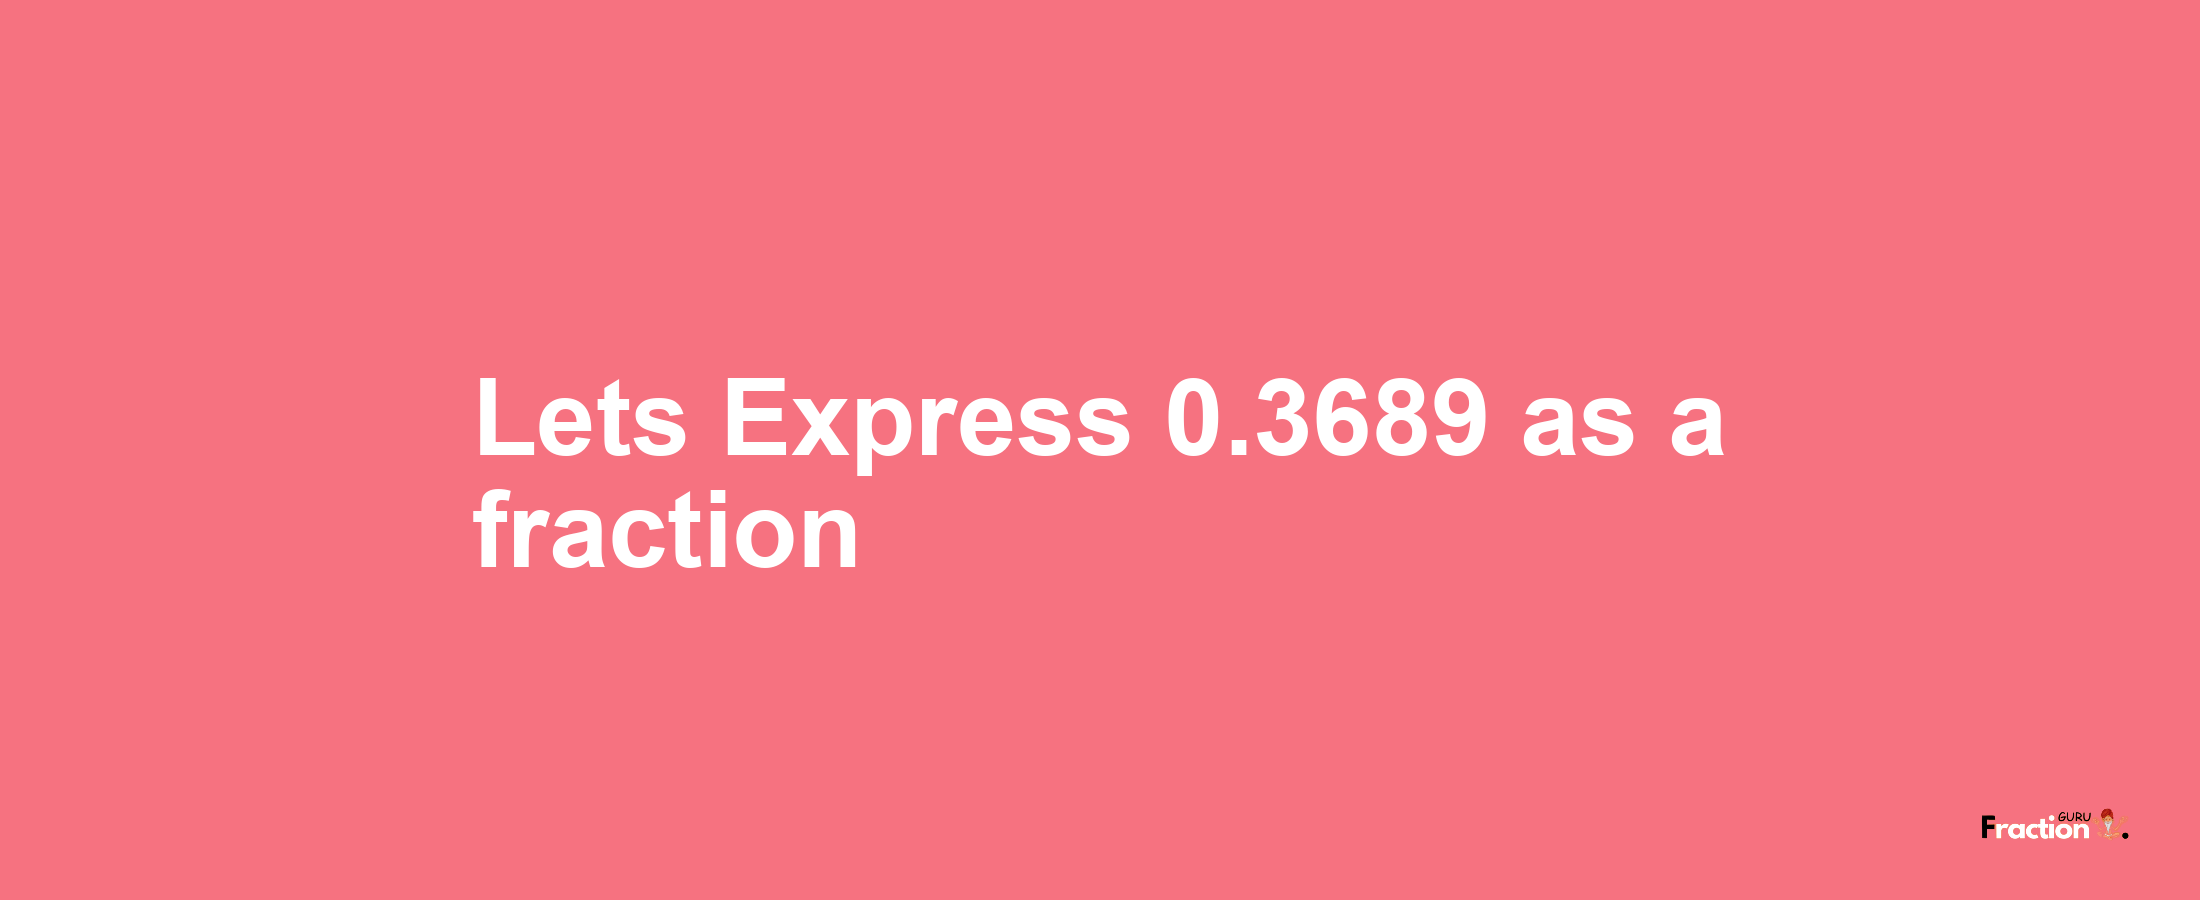 Lets Express 0.3689 as afraction